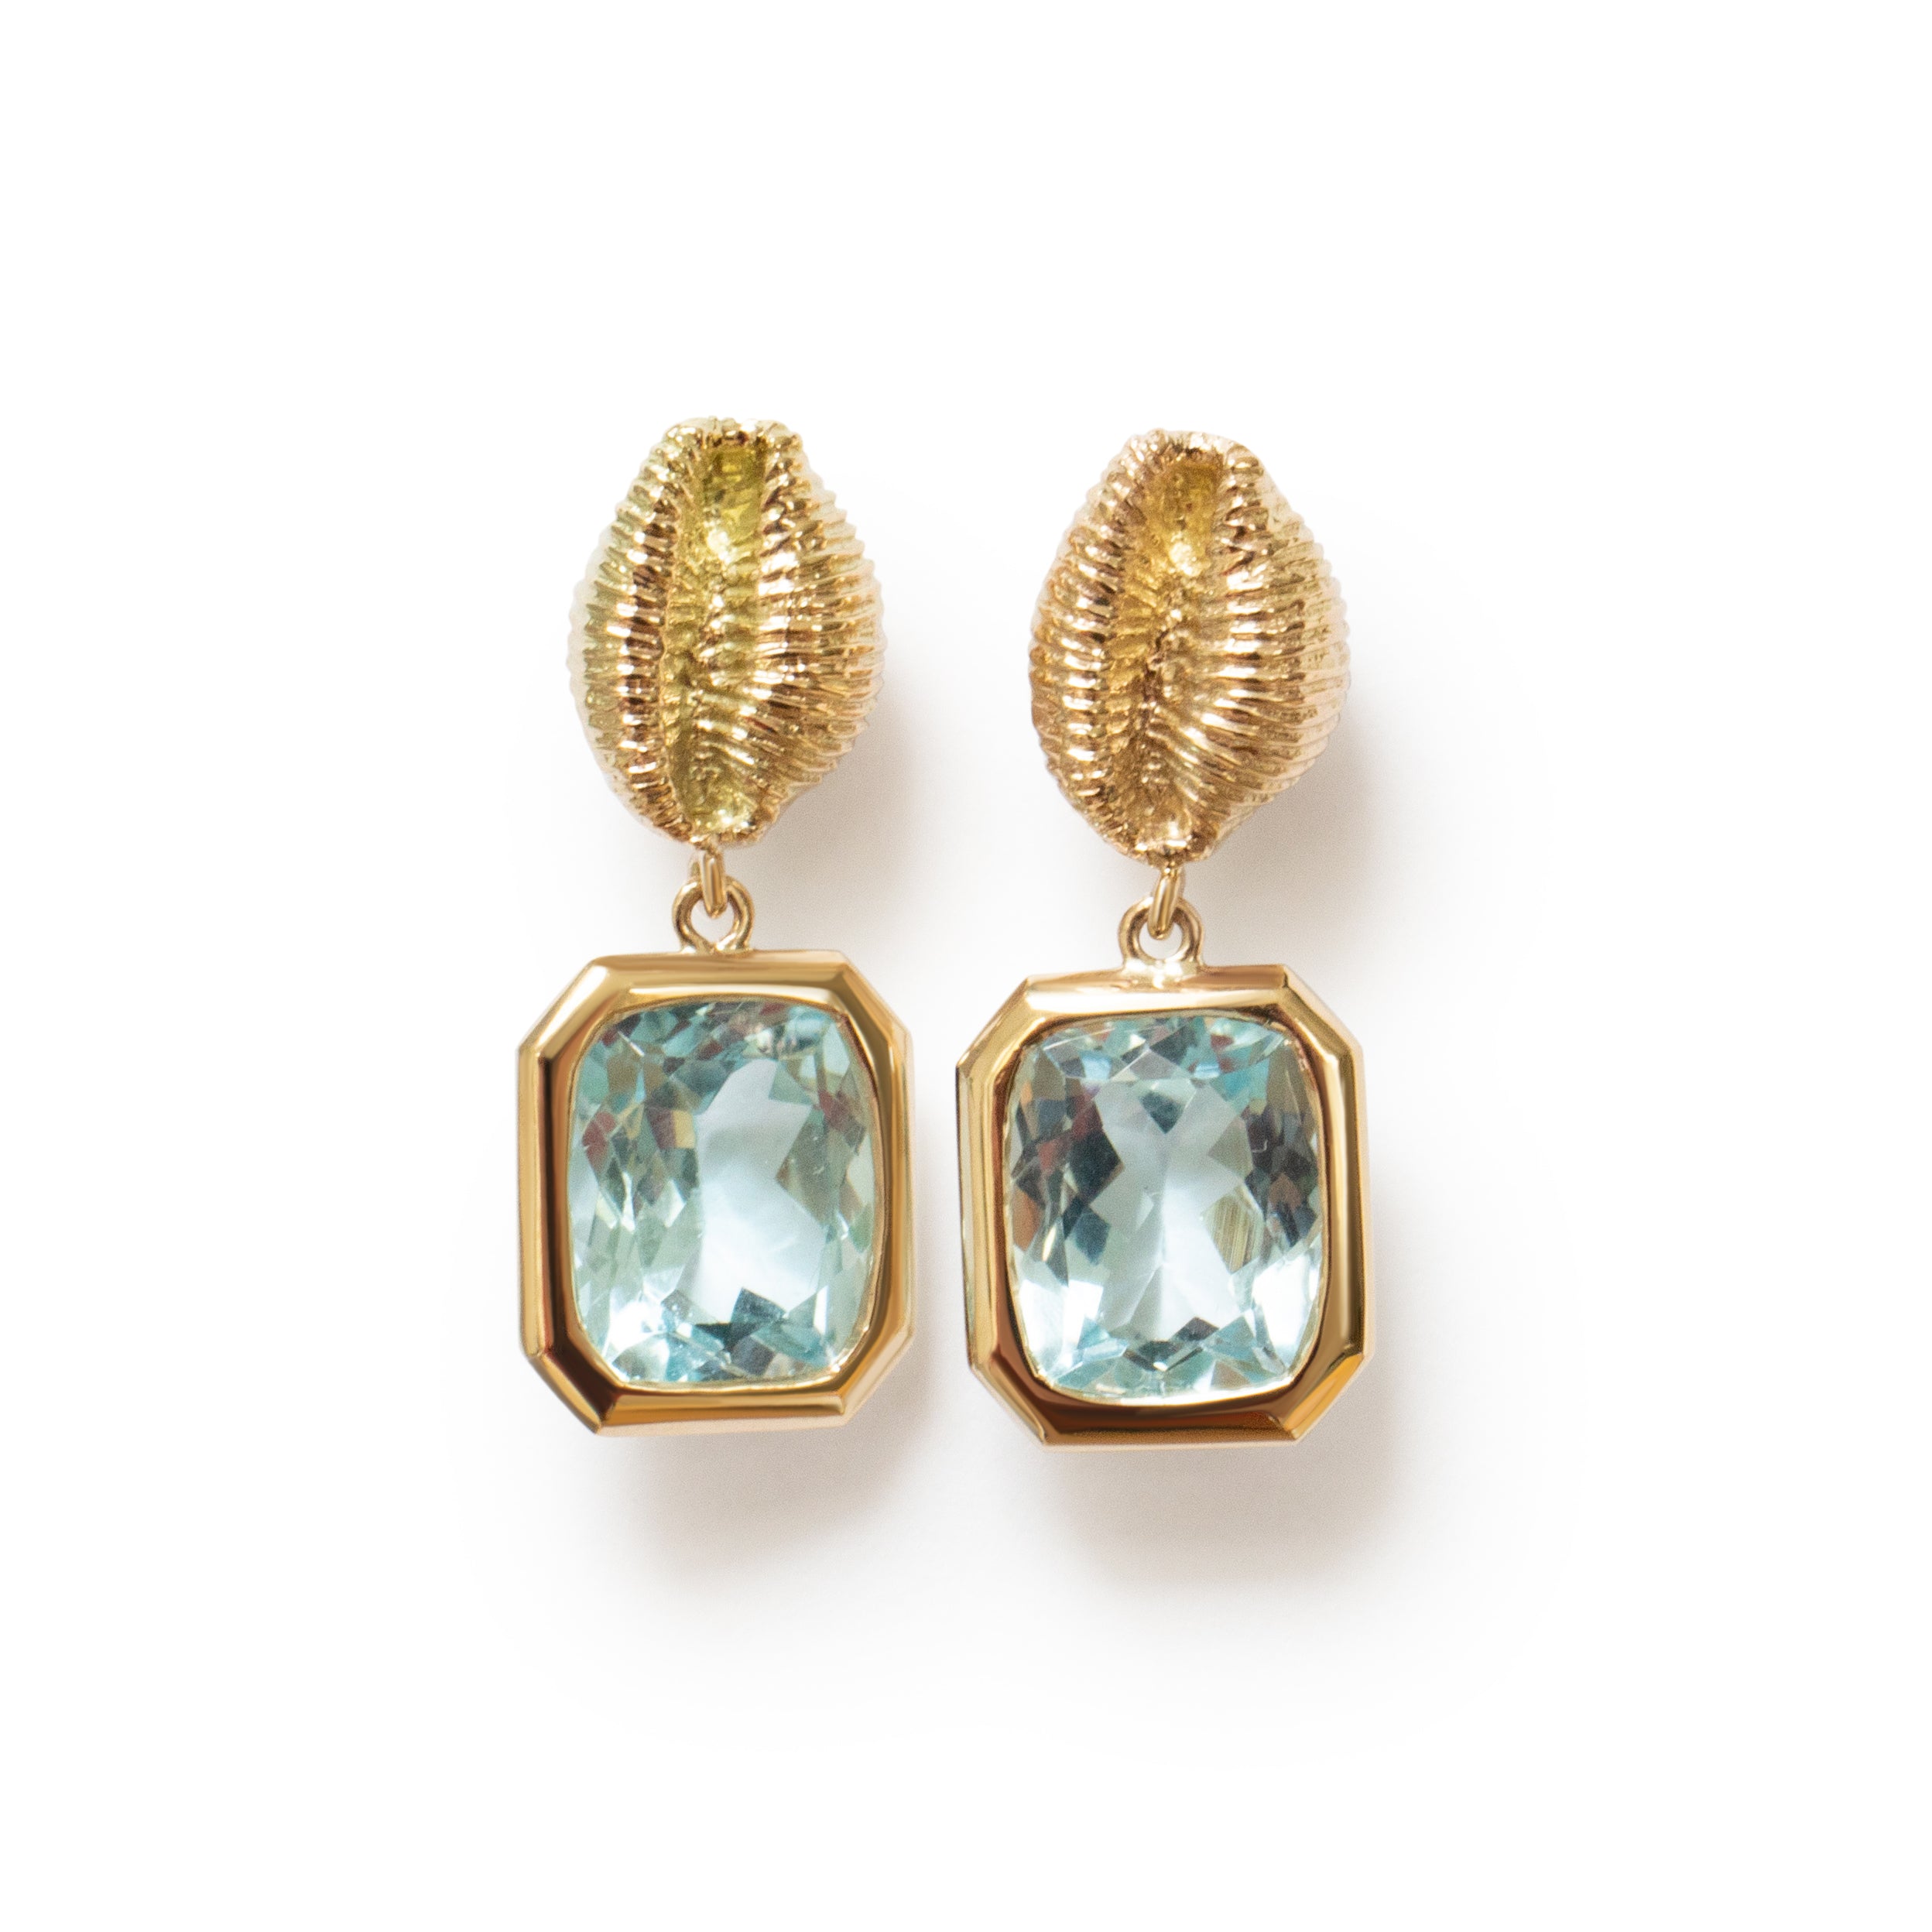 Bespoke 'Those Happy Places' collection Langland Bay Shell Earrings in gold with a cushion cut Topaz Drop. Serena Ansell bespoke jewellery design. Bespoke jewellery designer London. Bespoke earrings London. 